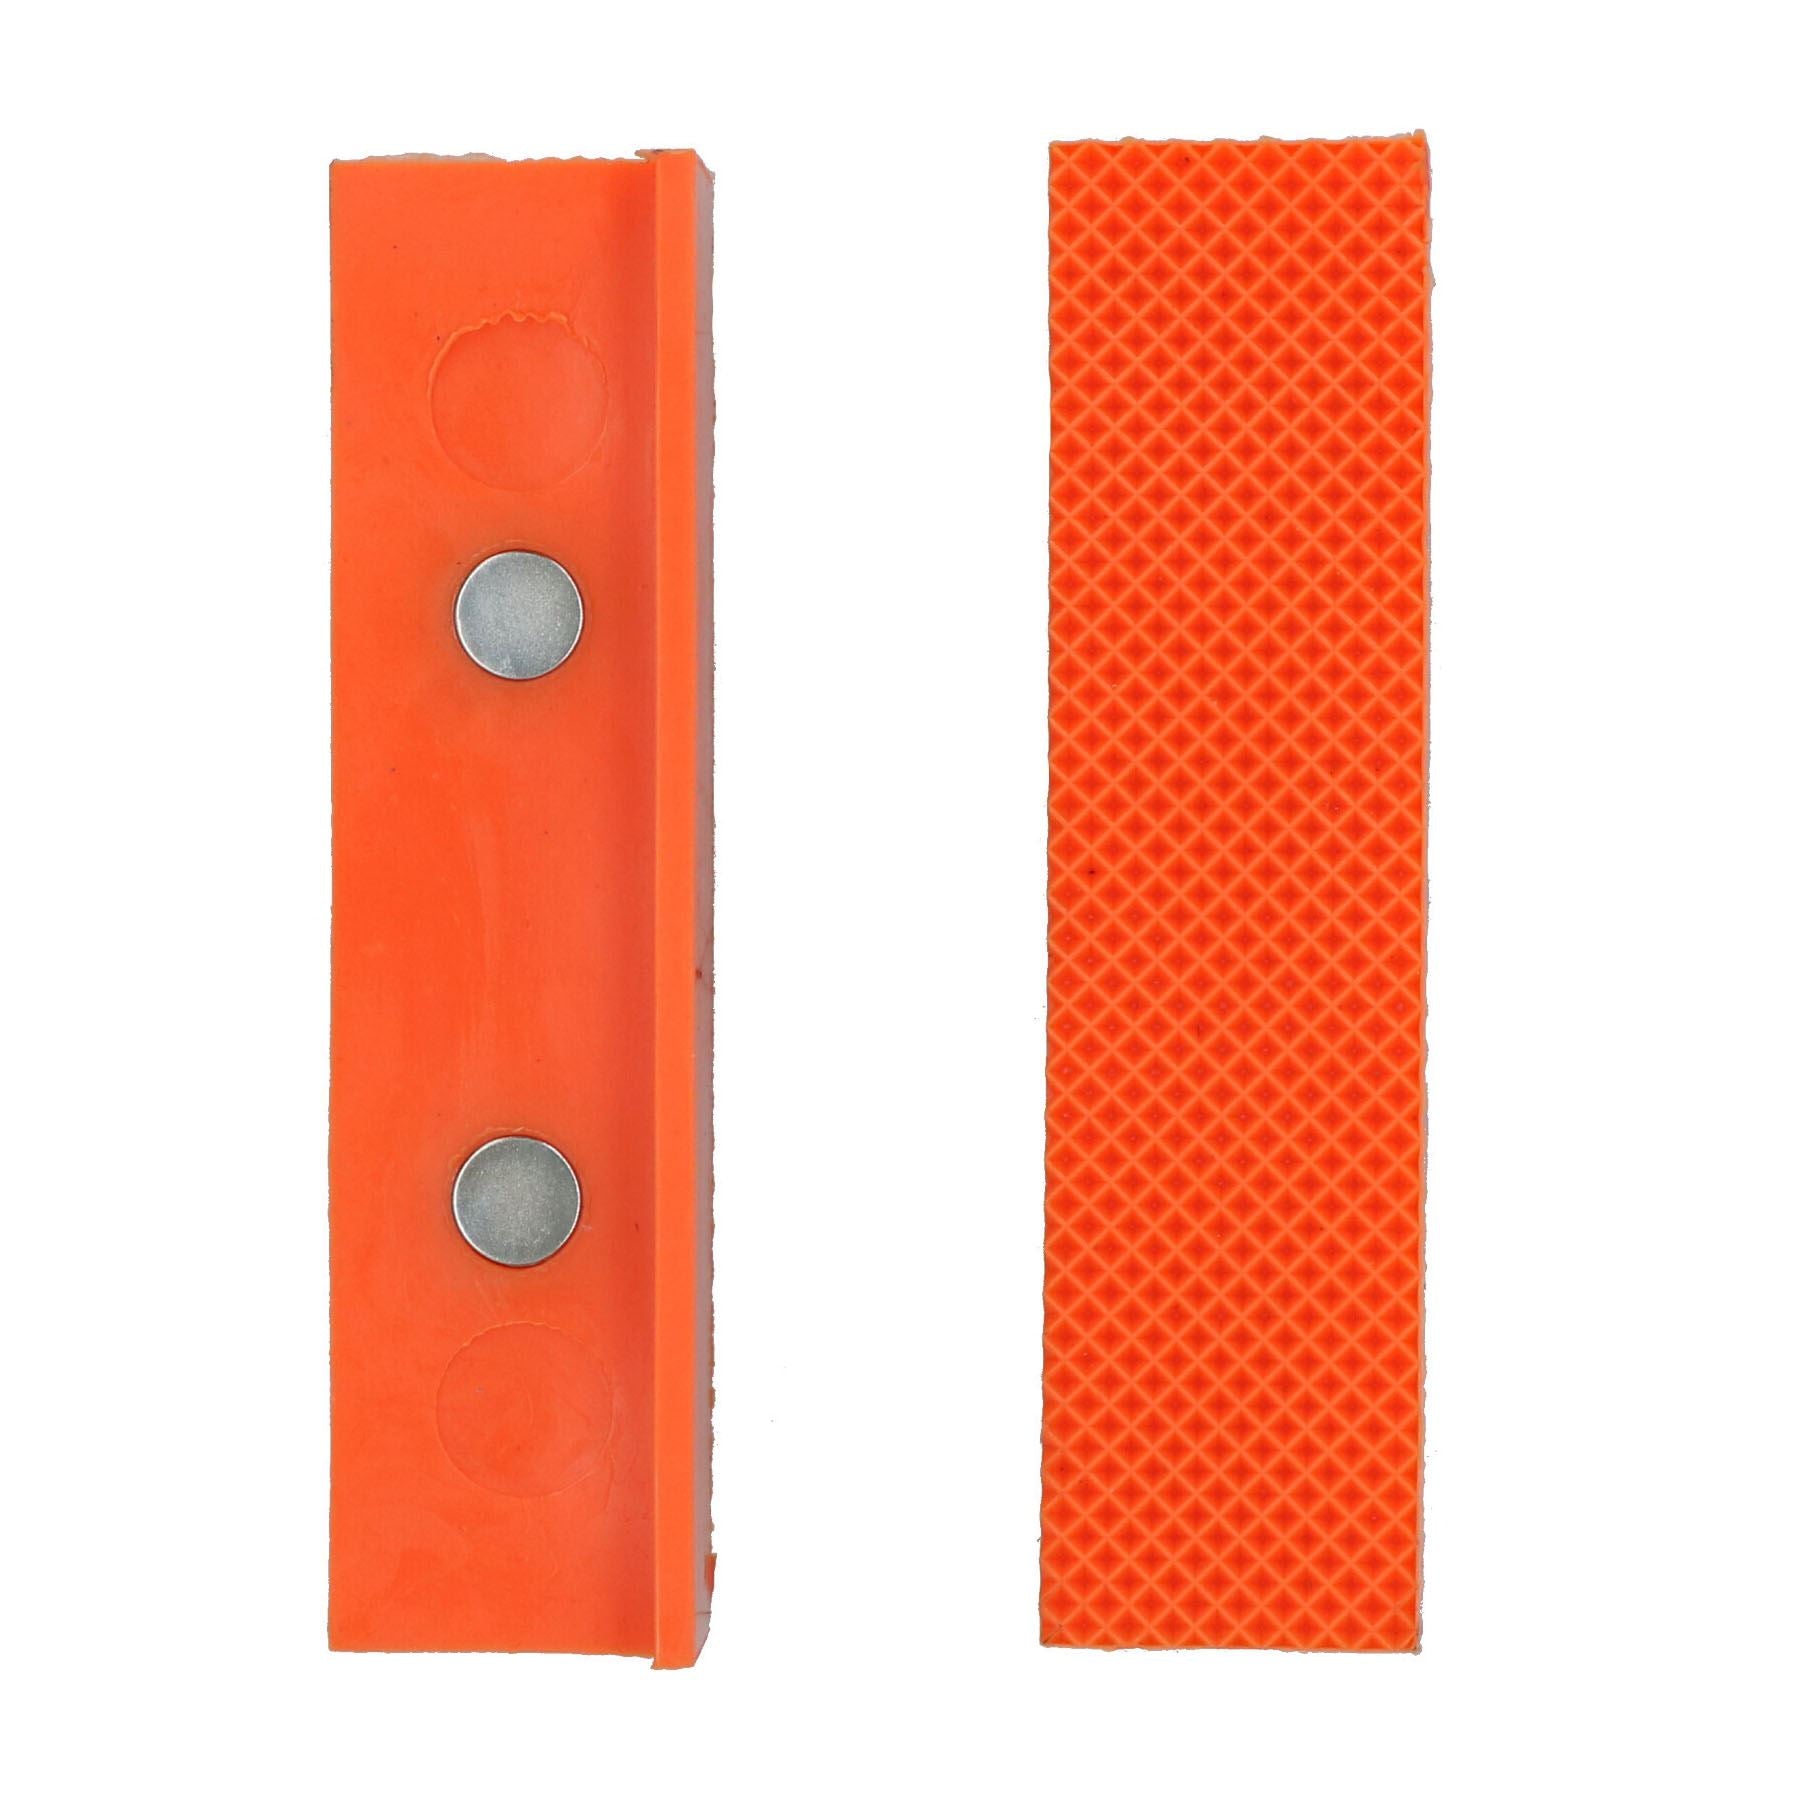 Magnetic Soft face Jaws Pads for Bench Vice Non marking 4” / 100mm Orange